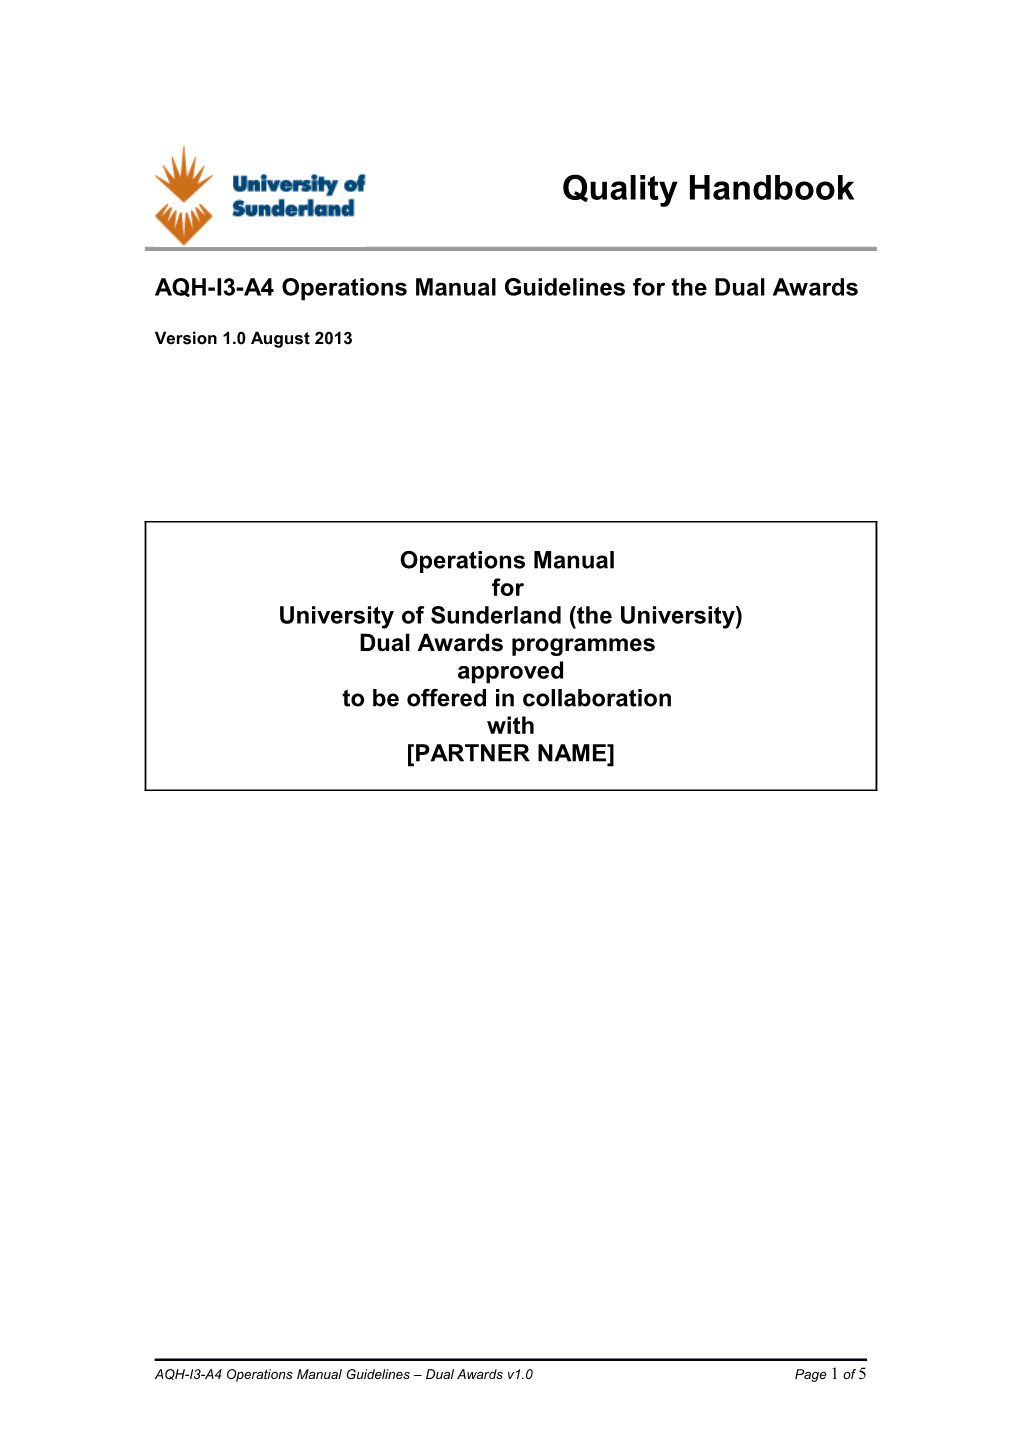 AQH-I3-A4 Operations Manual Guidelines for the Dual Awards